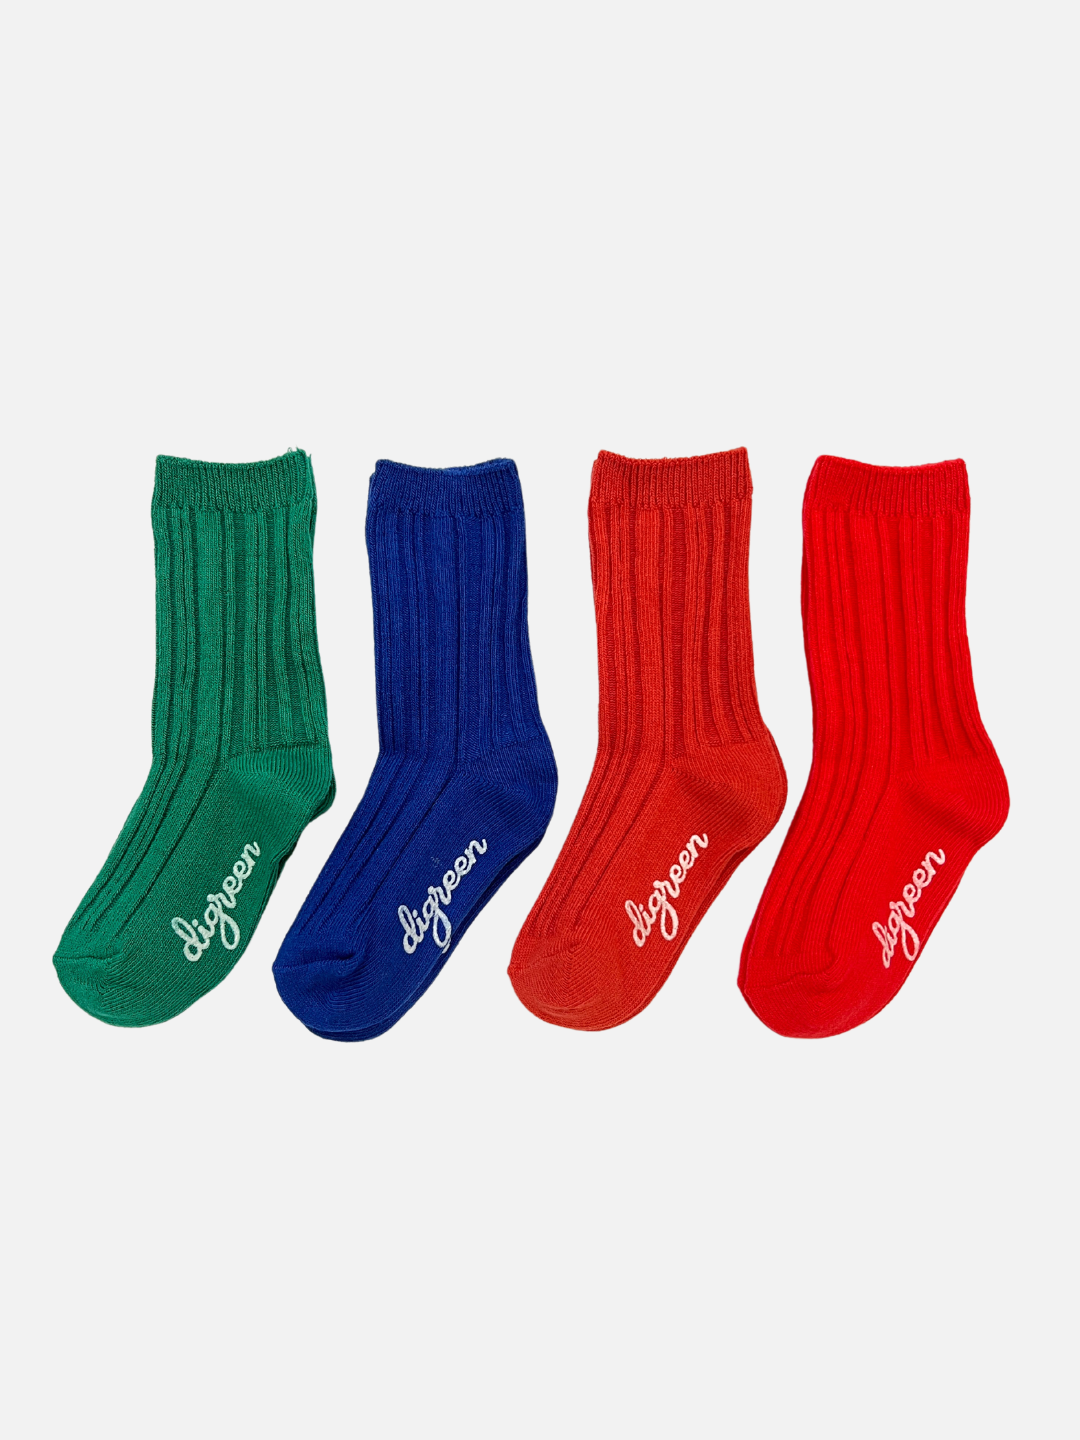 A set of four pairs of Pigment socks for kids. Green, Blue, Orange Red and Classic Red. with a digreen cursive logo on the bottom of the sock. 